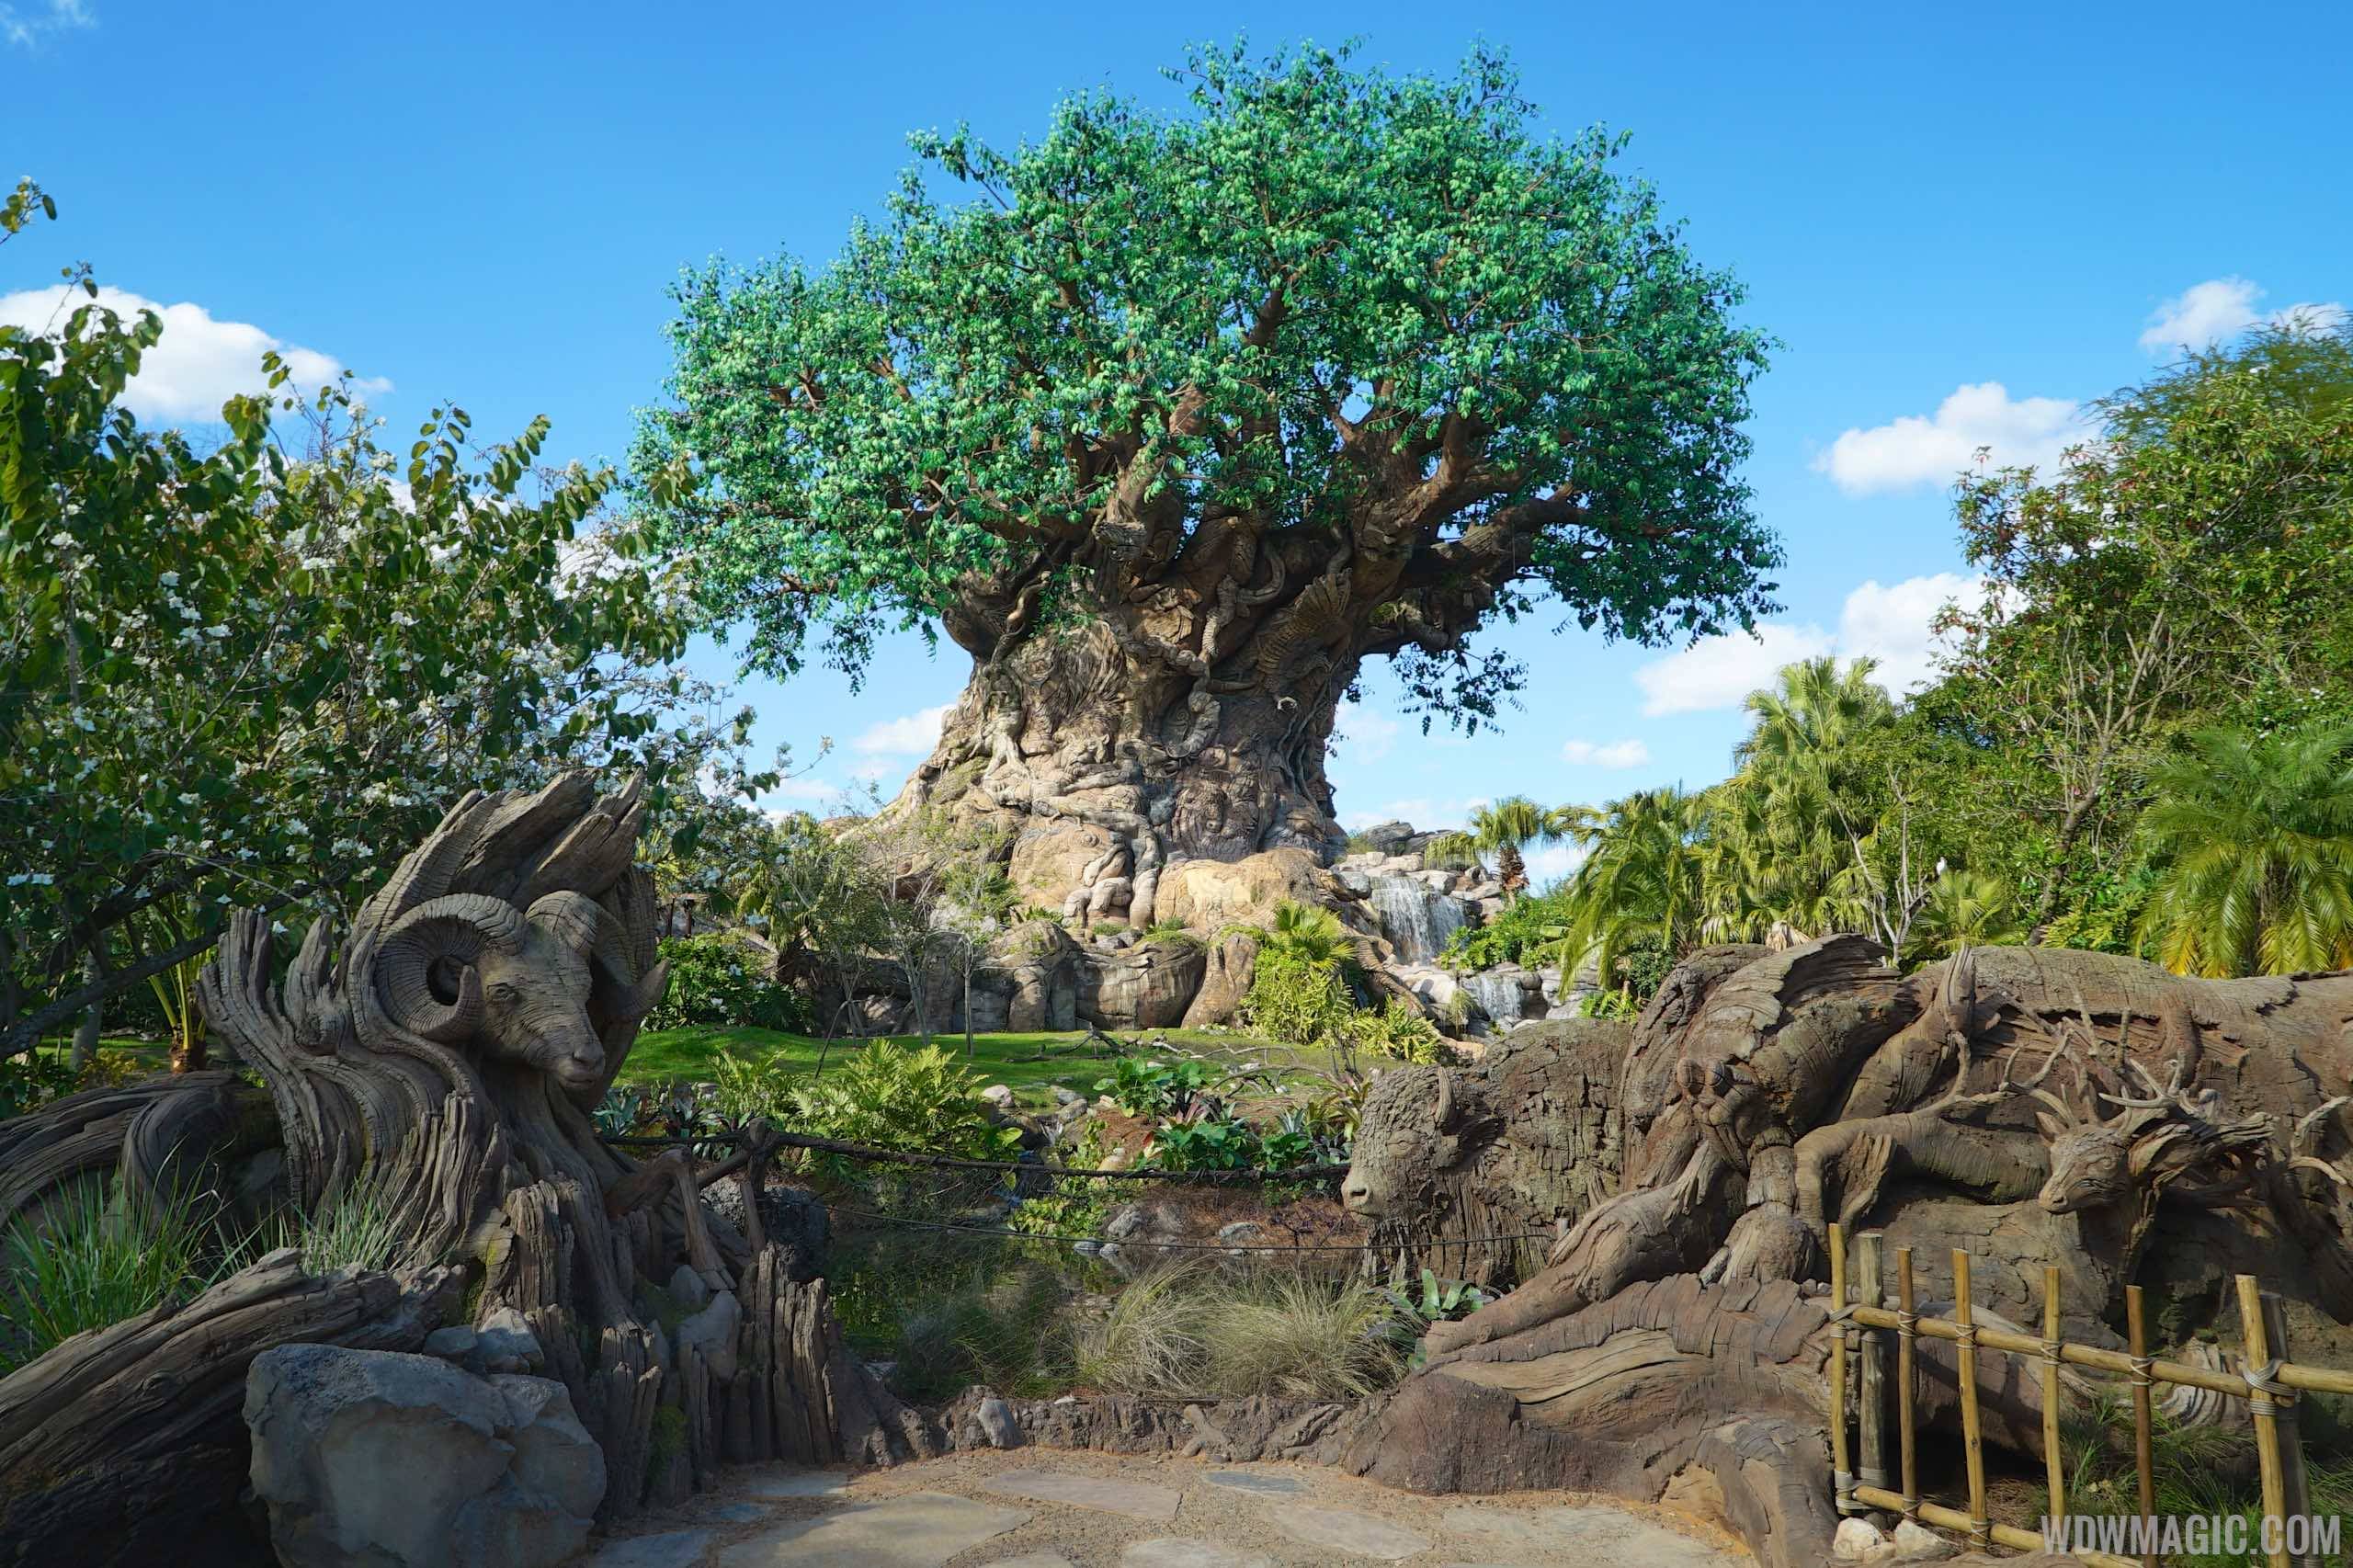 Disney's Animal Kingdom is gaining additional operating hours in July